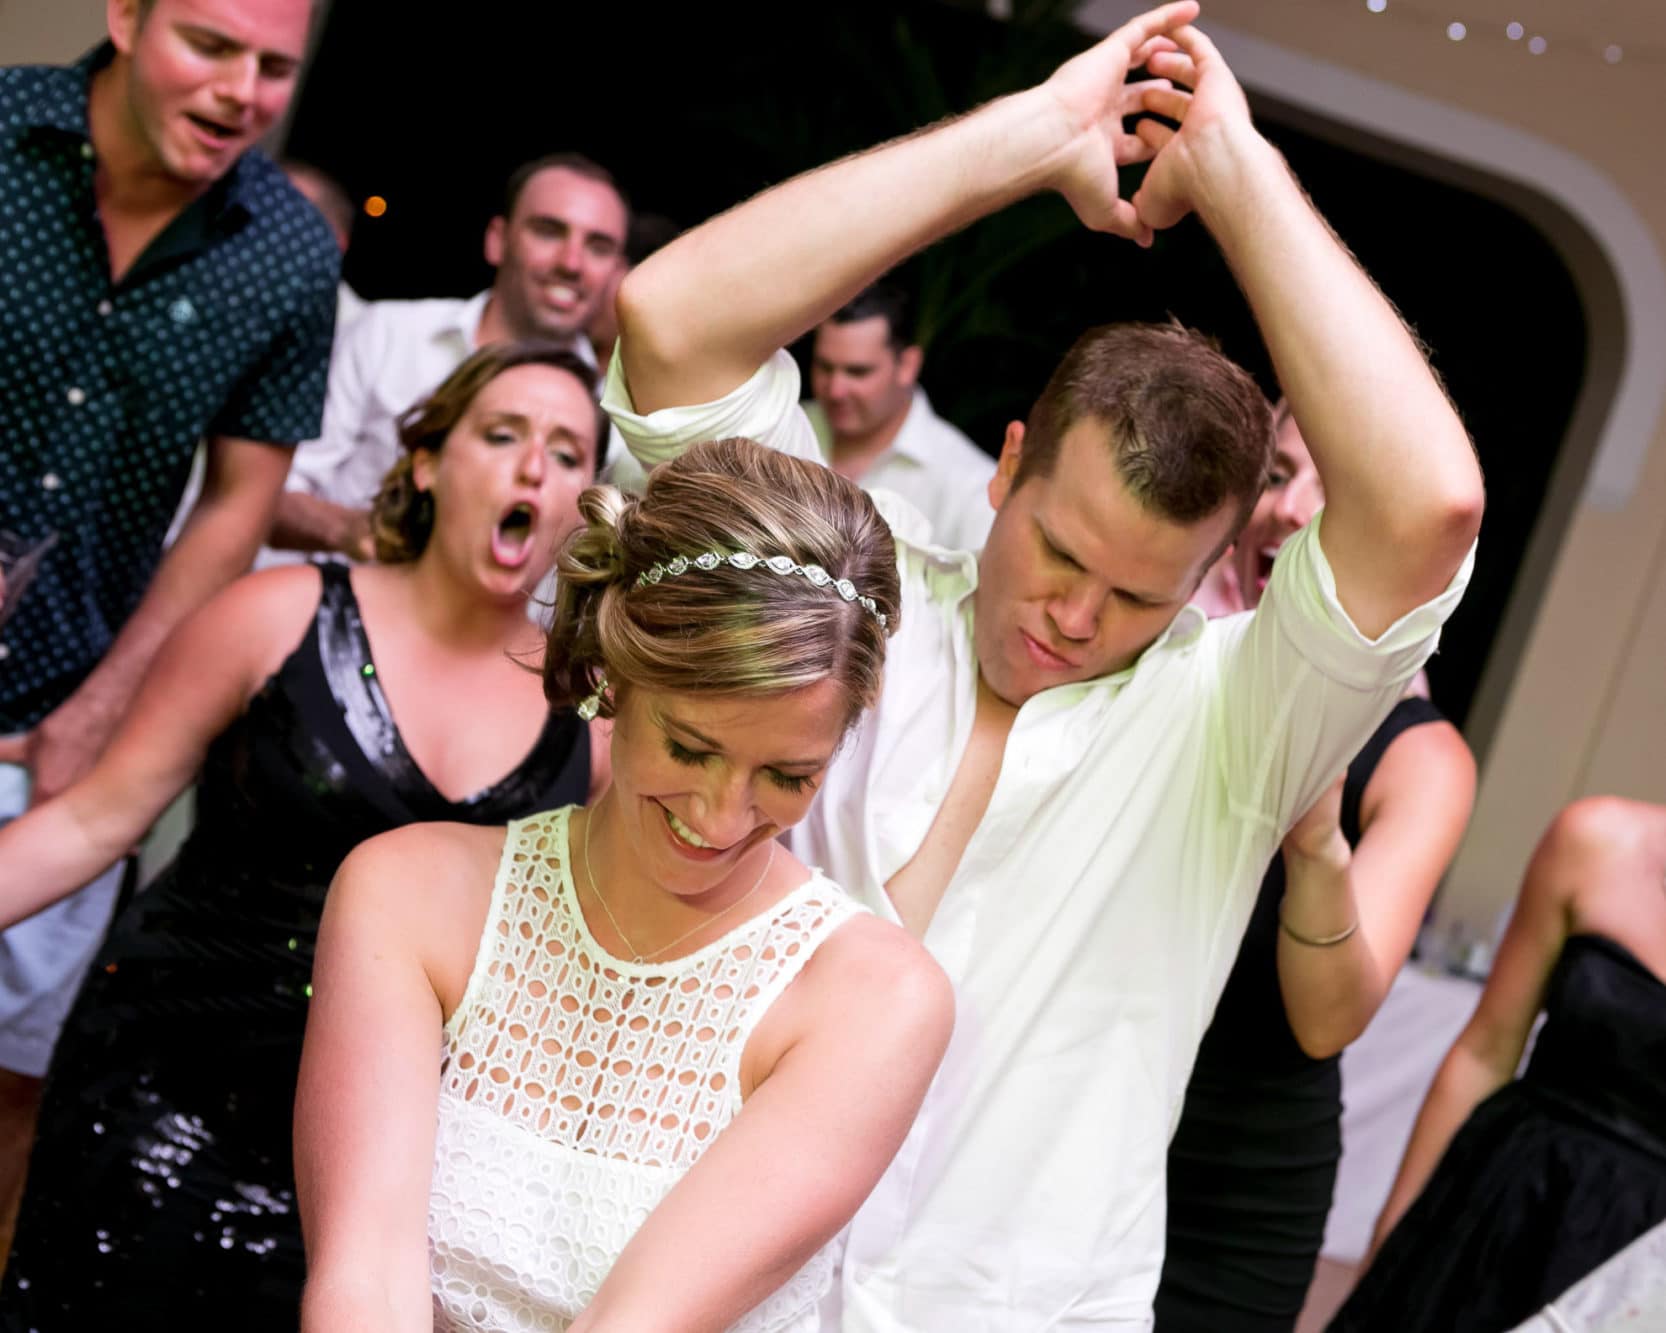 Bride and groom dance during wedding reception